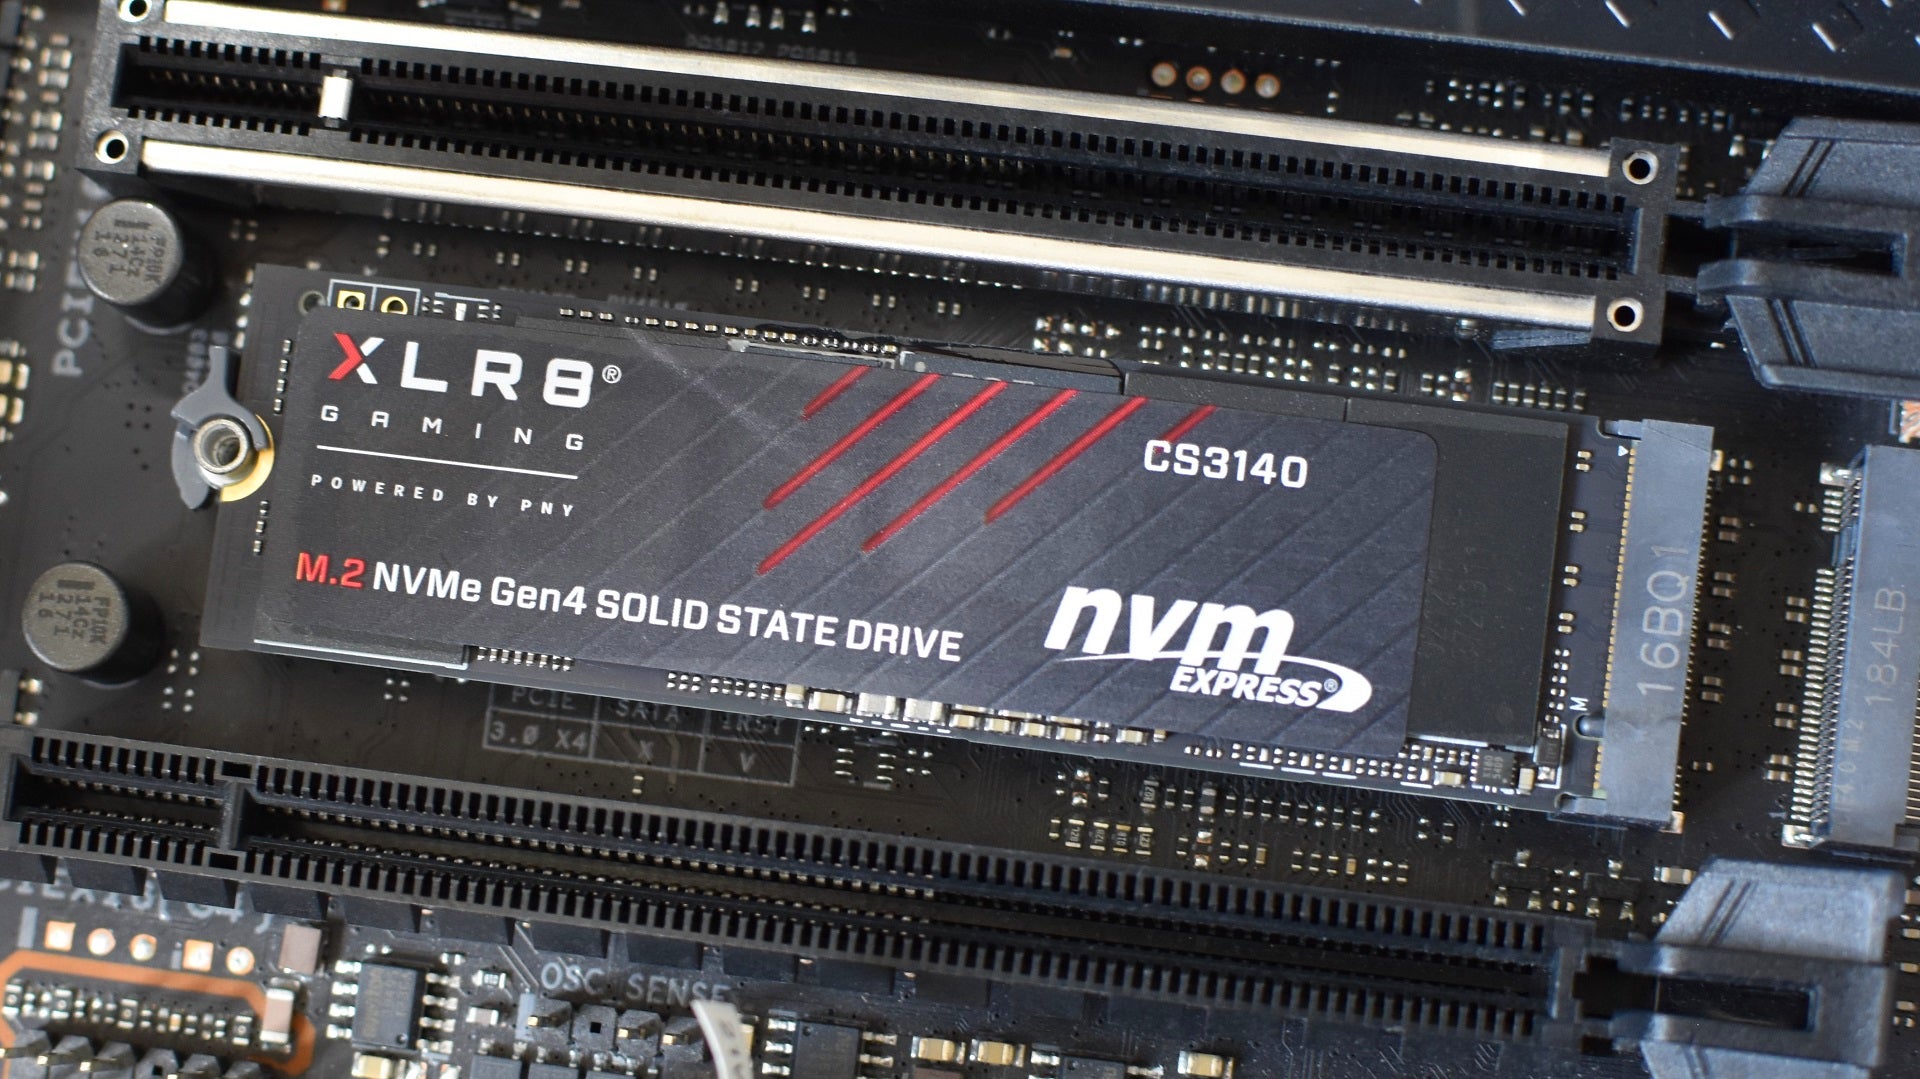 The PNY XLR8 CS3140 SSD installed in a motherboard M.2 slot.